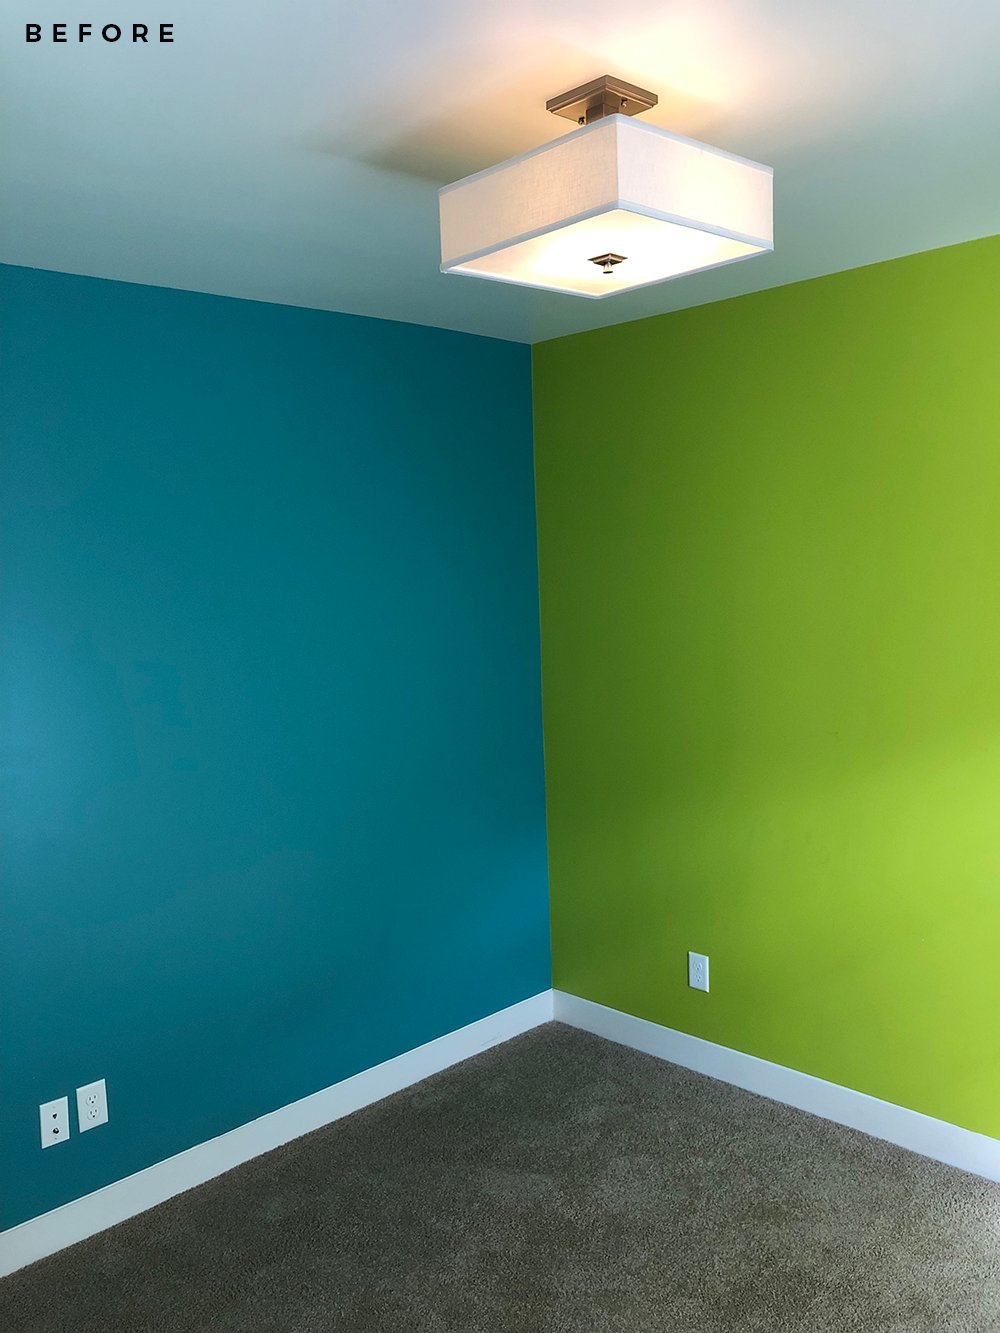 The Impact of Paint (Plus an Engagement Gift) - roomfortuesday.com